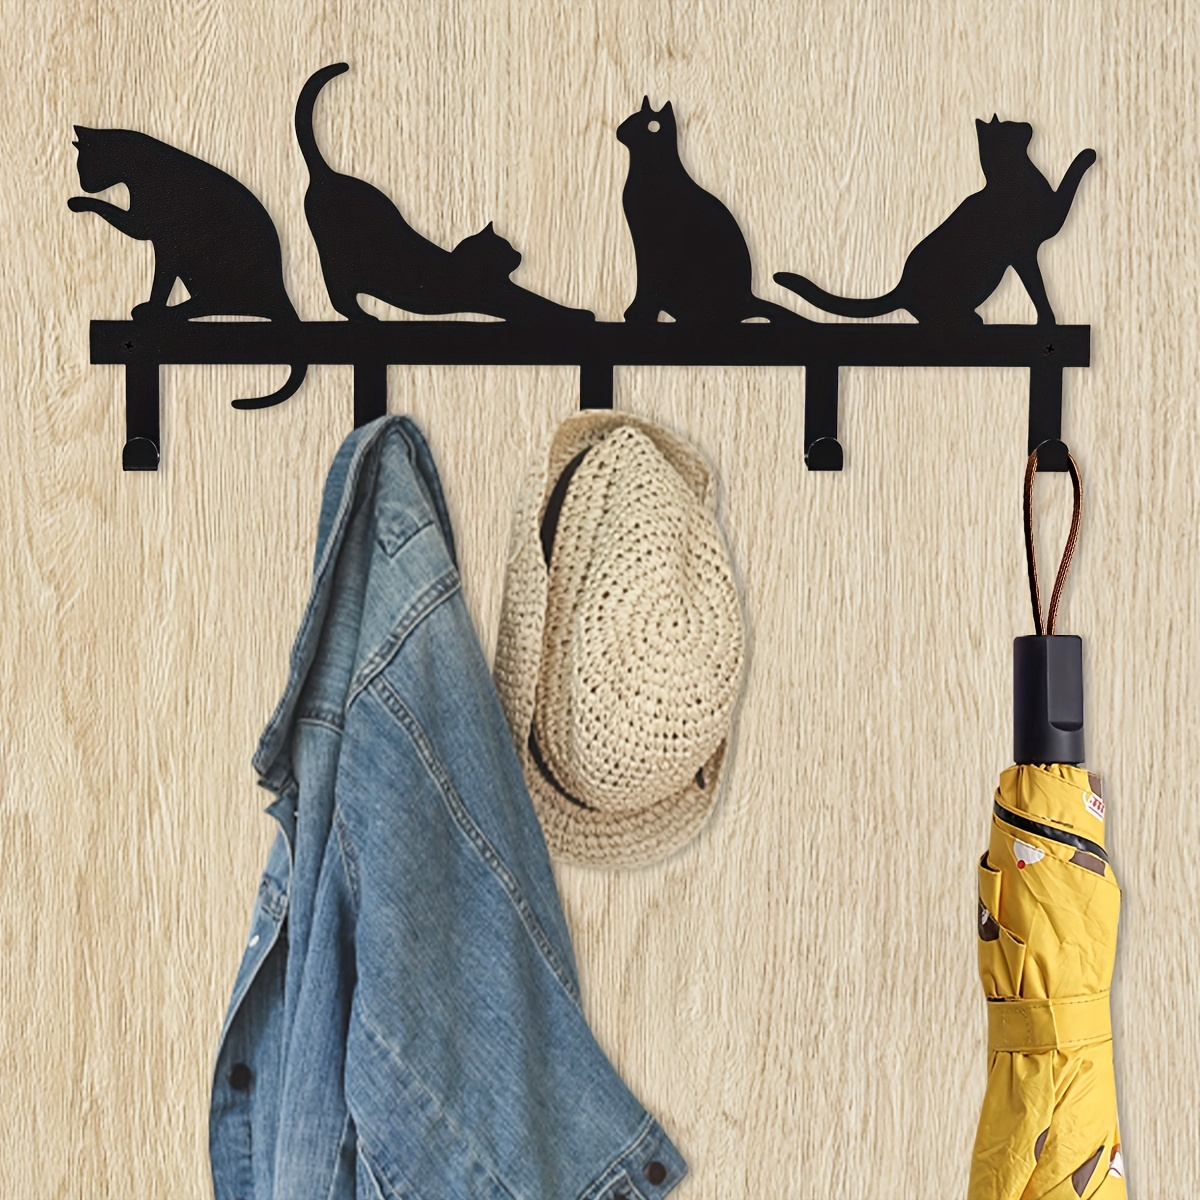 1pc Cats Coat Rack Wall Mounted Decorative Black Coat Hooks Metal Door  Hooks For Hanging Hat Towels Clothes, Hook Rail With 5 Hangers